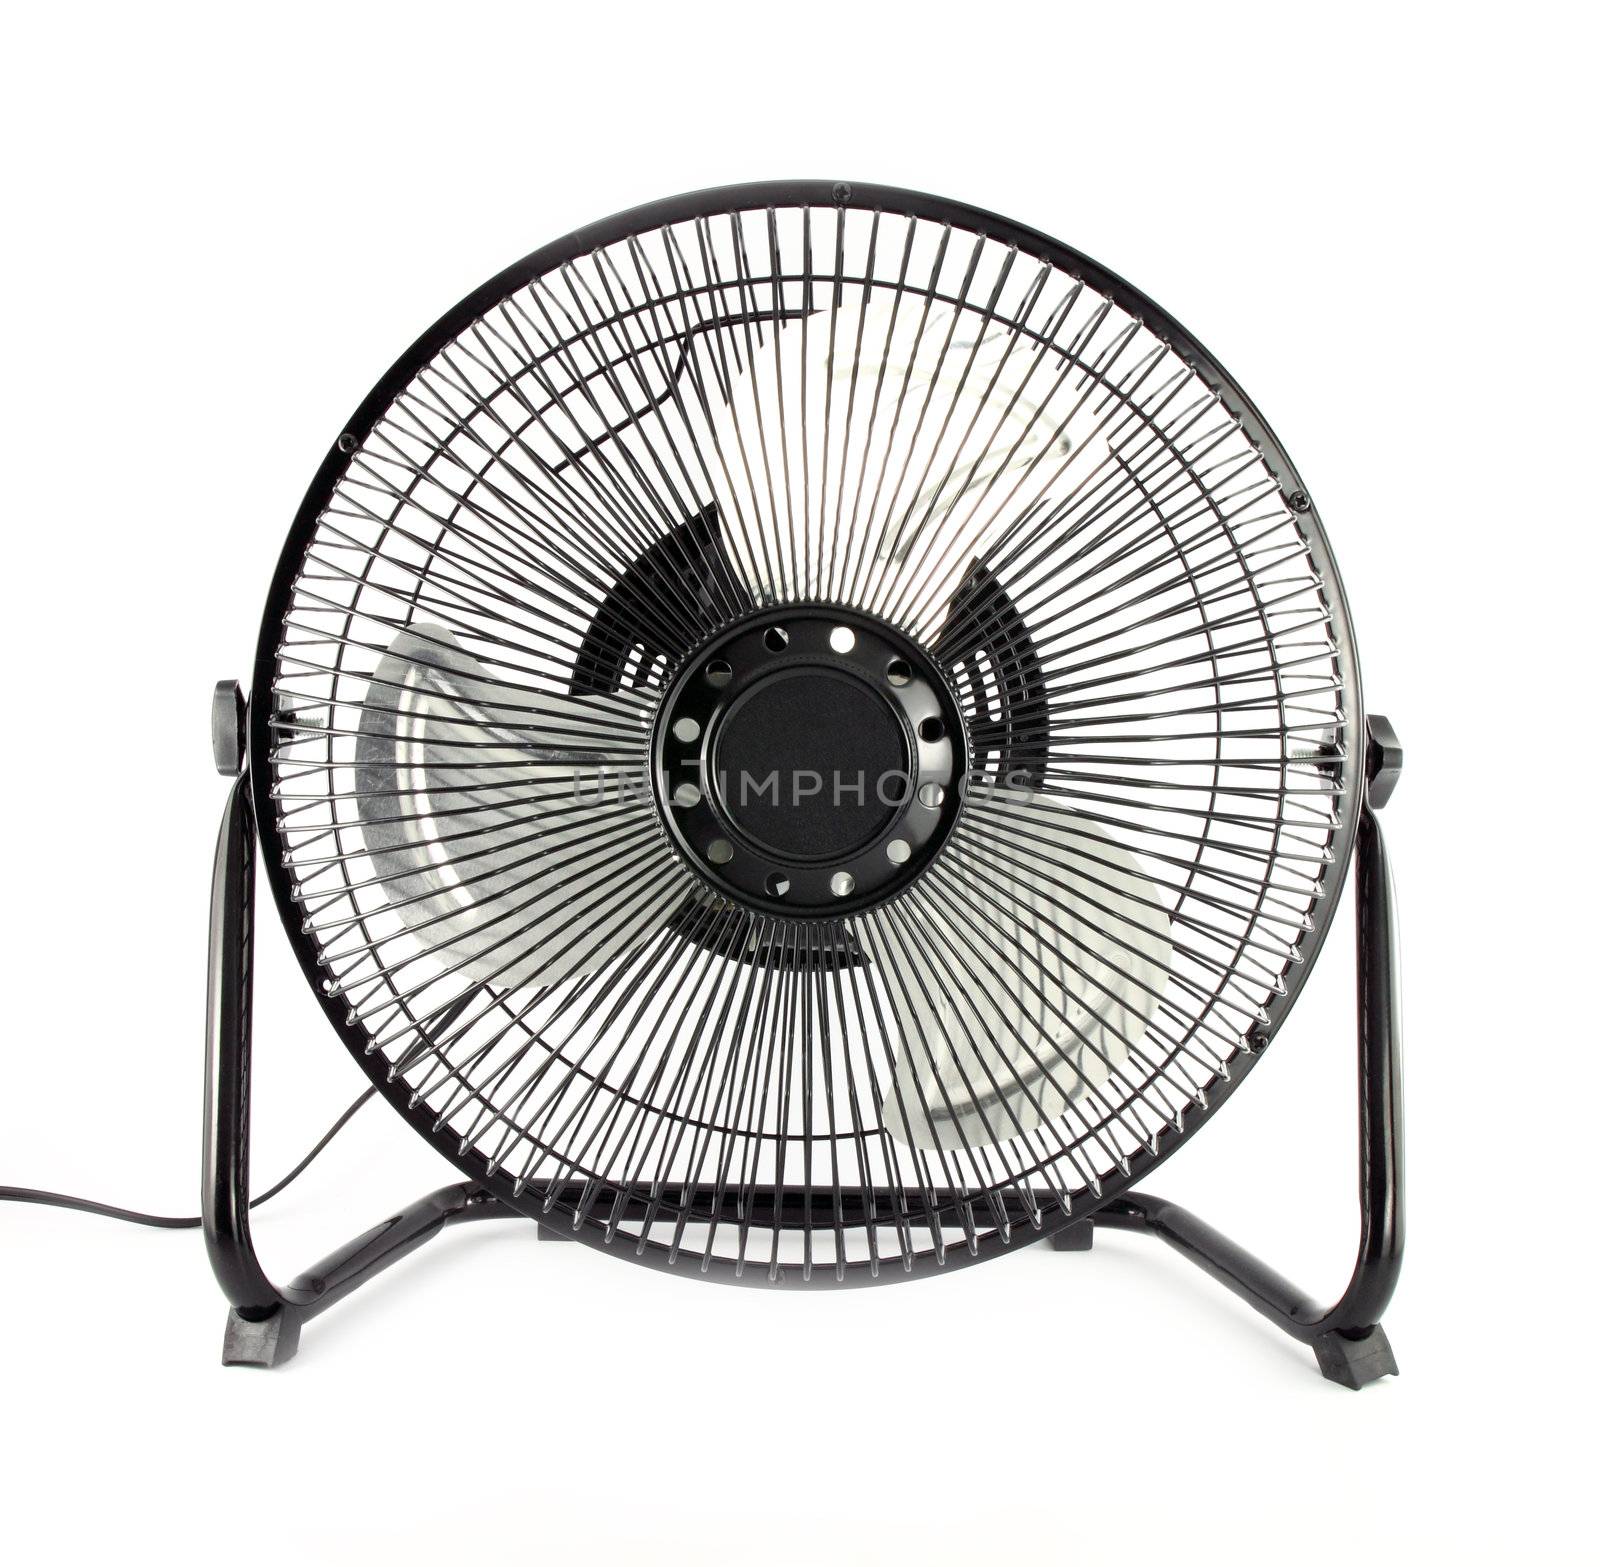 The black mini fan to reduce some hot weather by geargodz